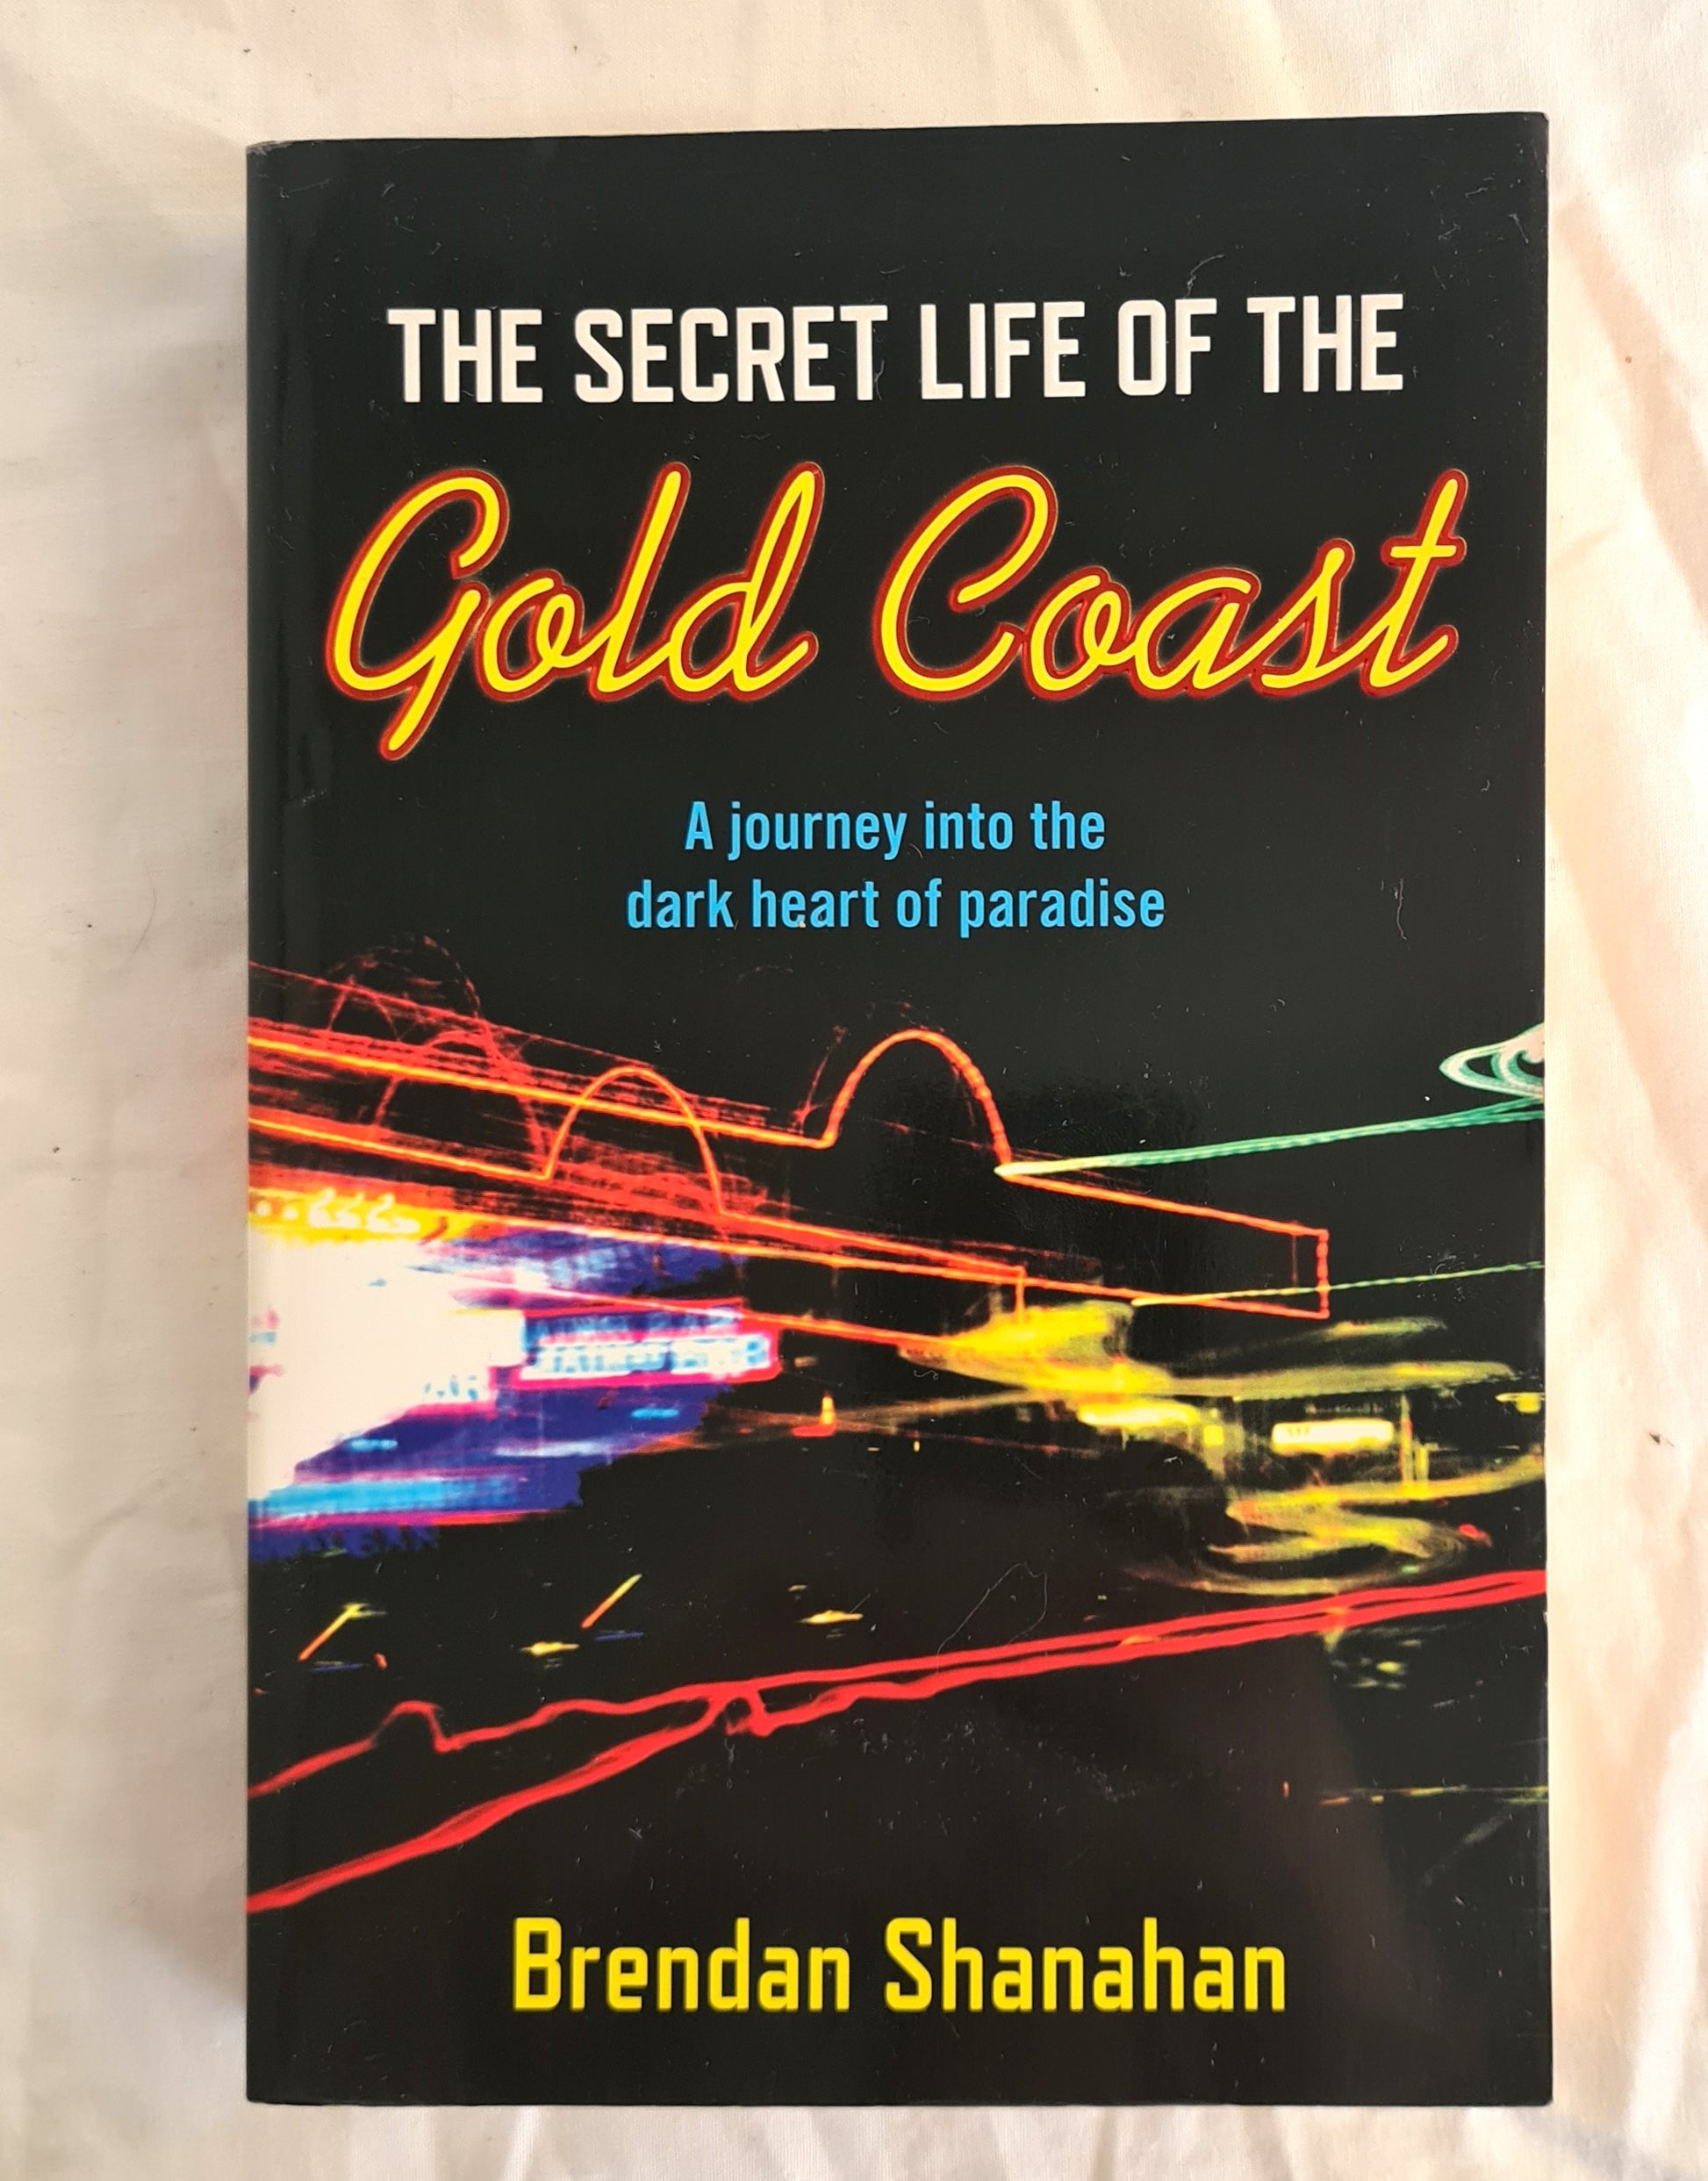 The Secret Life of the Gold Coast  A journey into the dark heart of paradise  by Brendan Shanahan